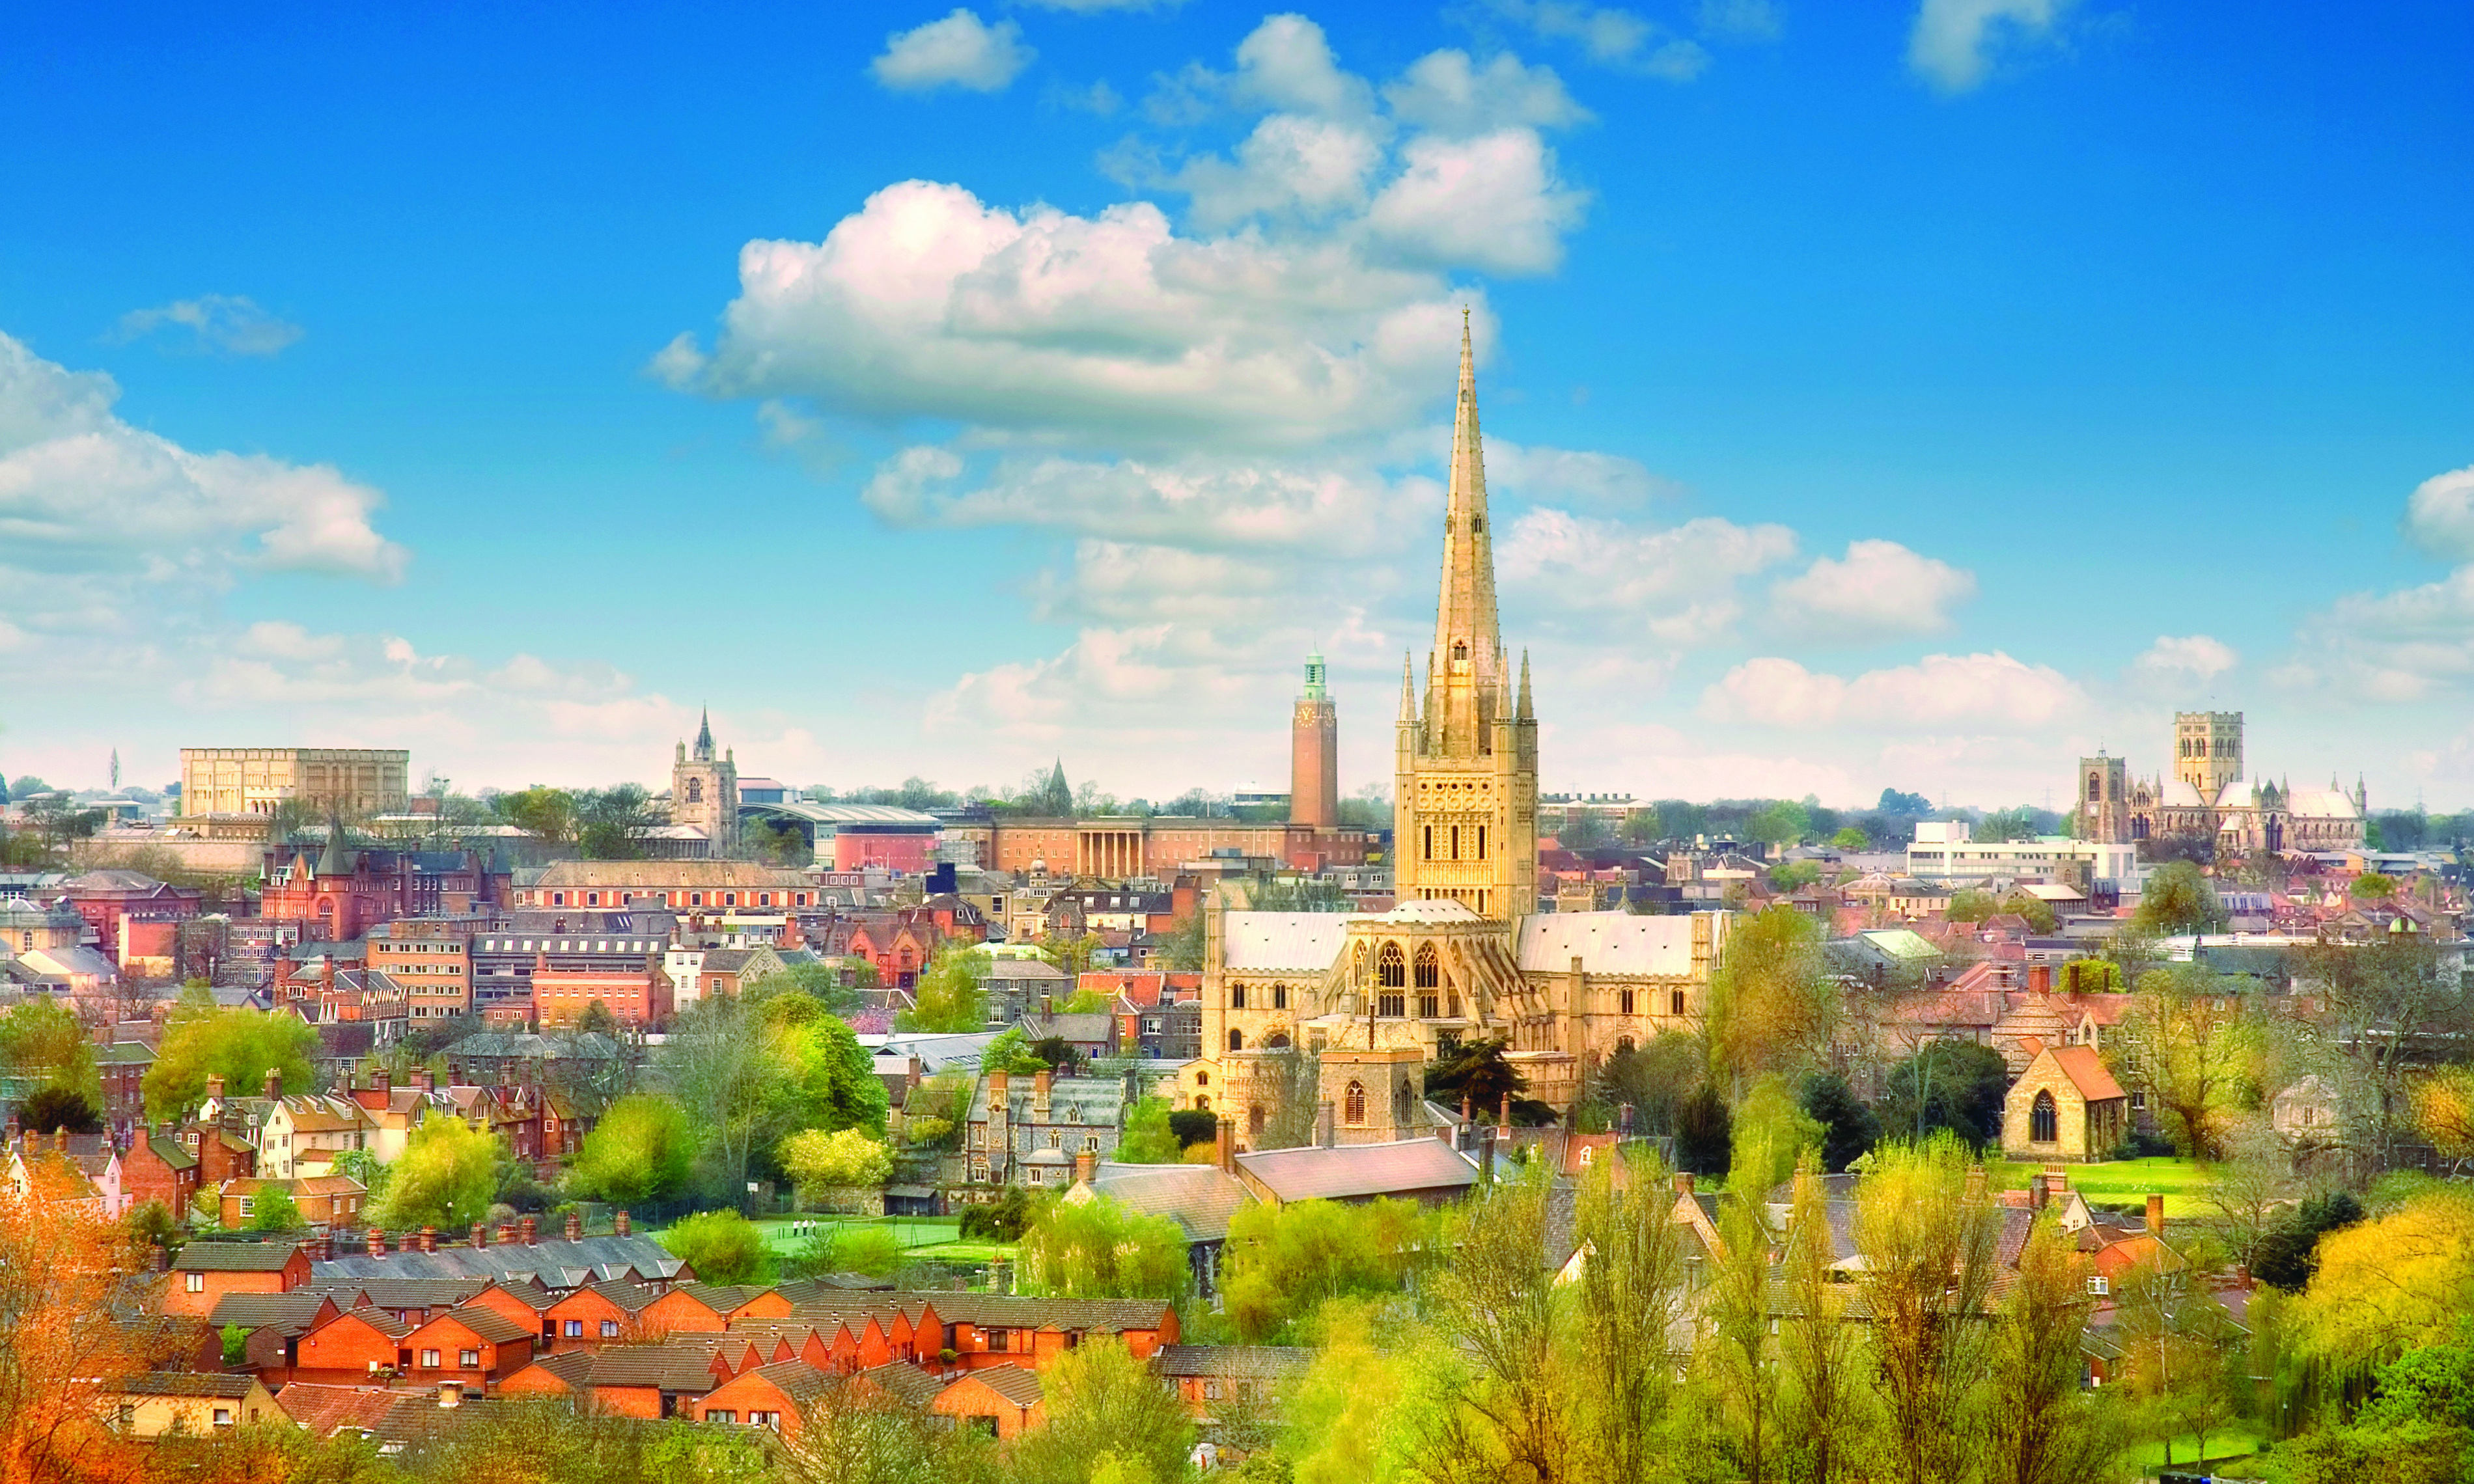 The beautiful Norwich’s cathedral